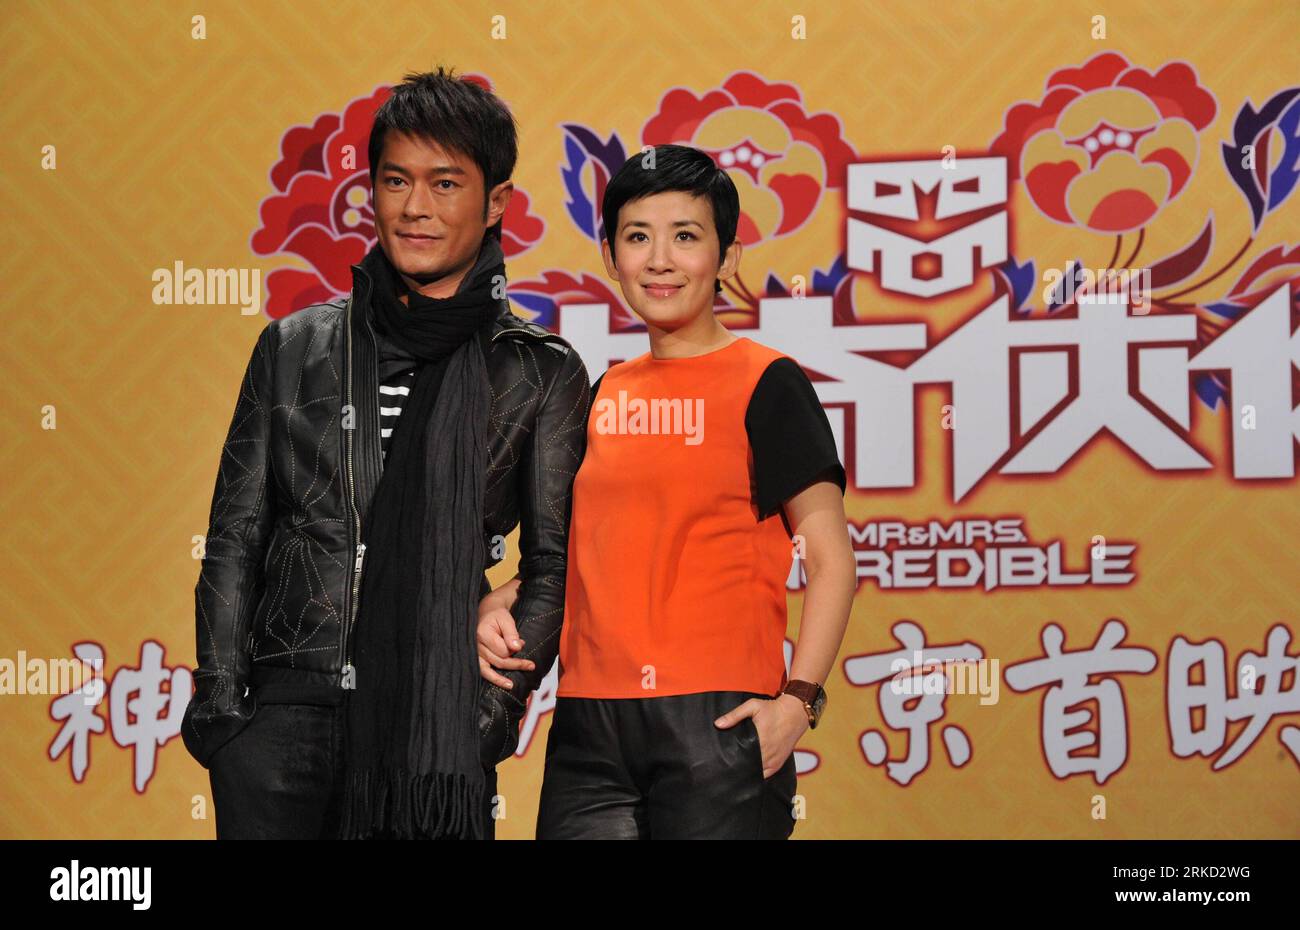 Bildnummer: 54848122  Datum: 24.01.2011  Copyright: imago/Xinhua (110124) -- BEIJING, Jan. 24, 2011 (Xinhua) -- Actor Louis Koo (L) and actress Sandra Ng attend a premiere press conference of the comedy film Mr. and Mrs. Incredible in Beijing, capital of China, Jan. 24, 2011. The comedy film directed by Vincent Kok will be staged on Feb. 3. (Xinhua/Ji Guoqiang) (mcg) CHINA-BEIJING-FILM MR. AND MRS. INCREDIBLE -PREMIERE PRESS CONFERENCE (CN) PUBLICATIONxNOTxINxCHN People Kultur Entertainment Film Pressetermin kbdig xdp 2011 quer    Bildnummer 54848122 Date 24 01 2011 Copyright Imago XINHUA 1101 Stock Photo